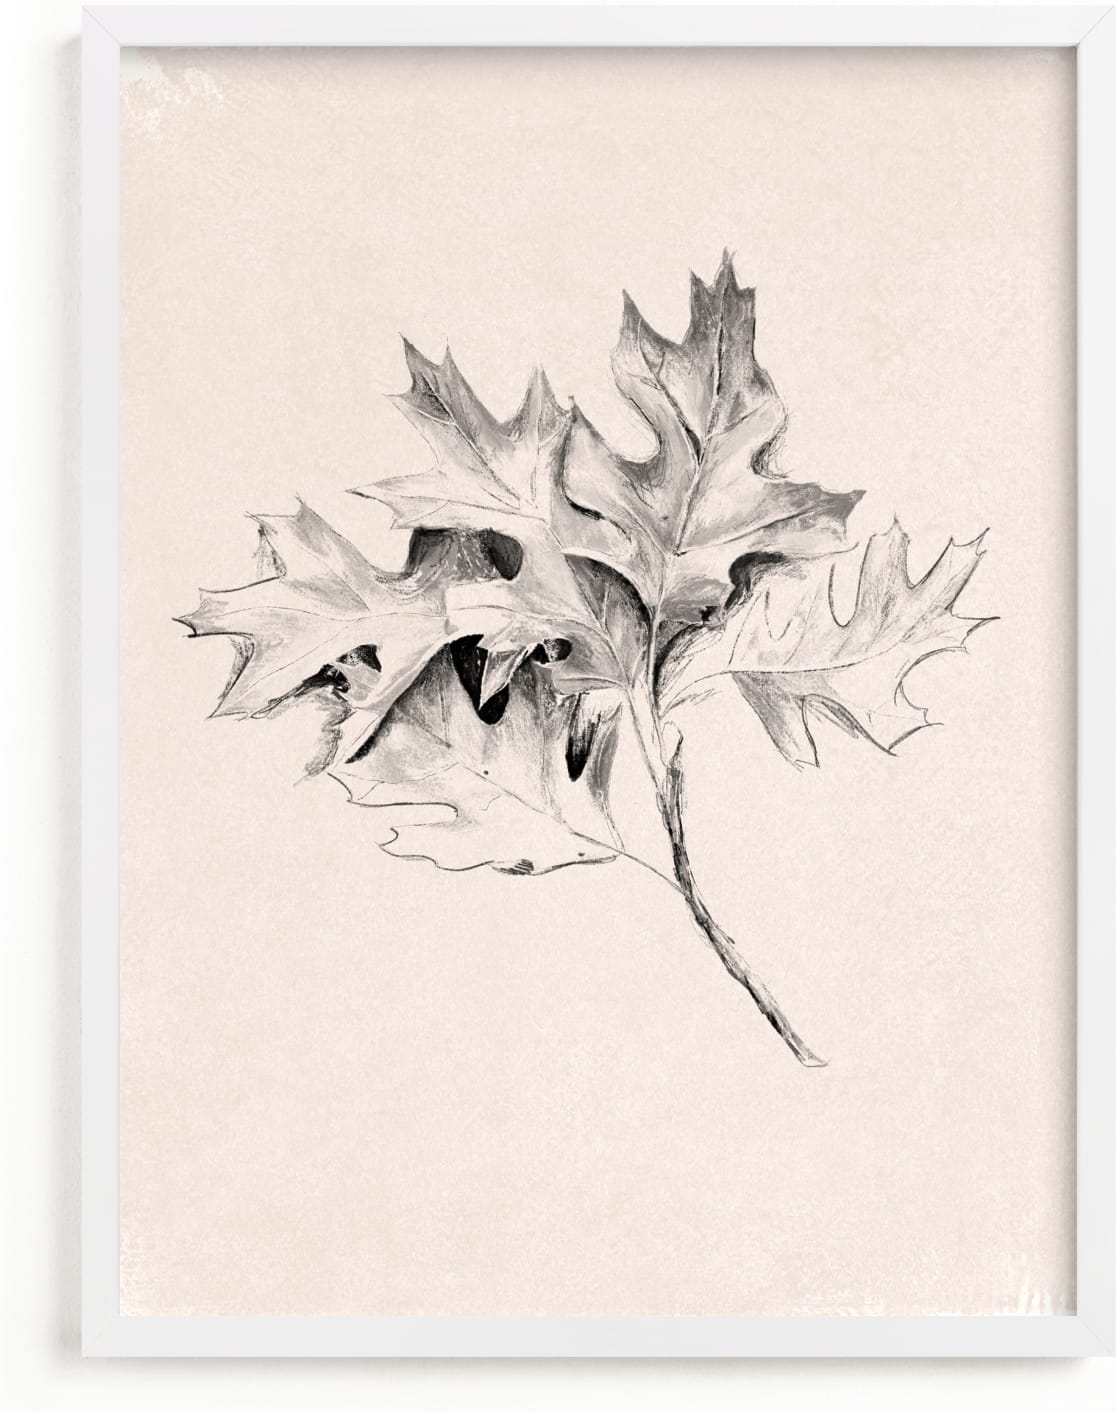 This is a black and white art by Olivia Kanaley Inman called Leaf Study.